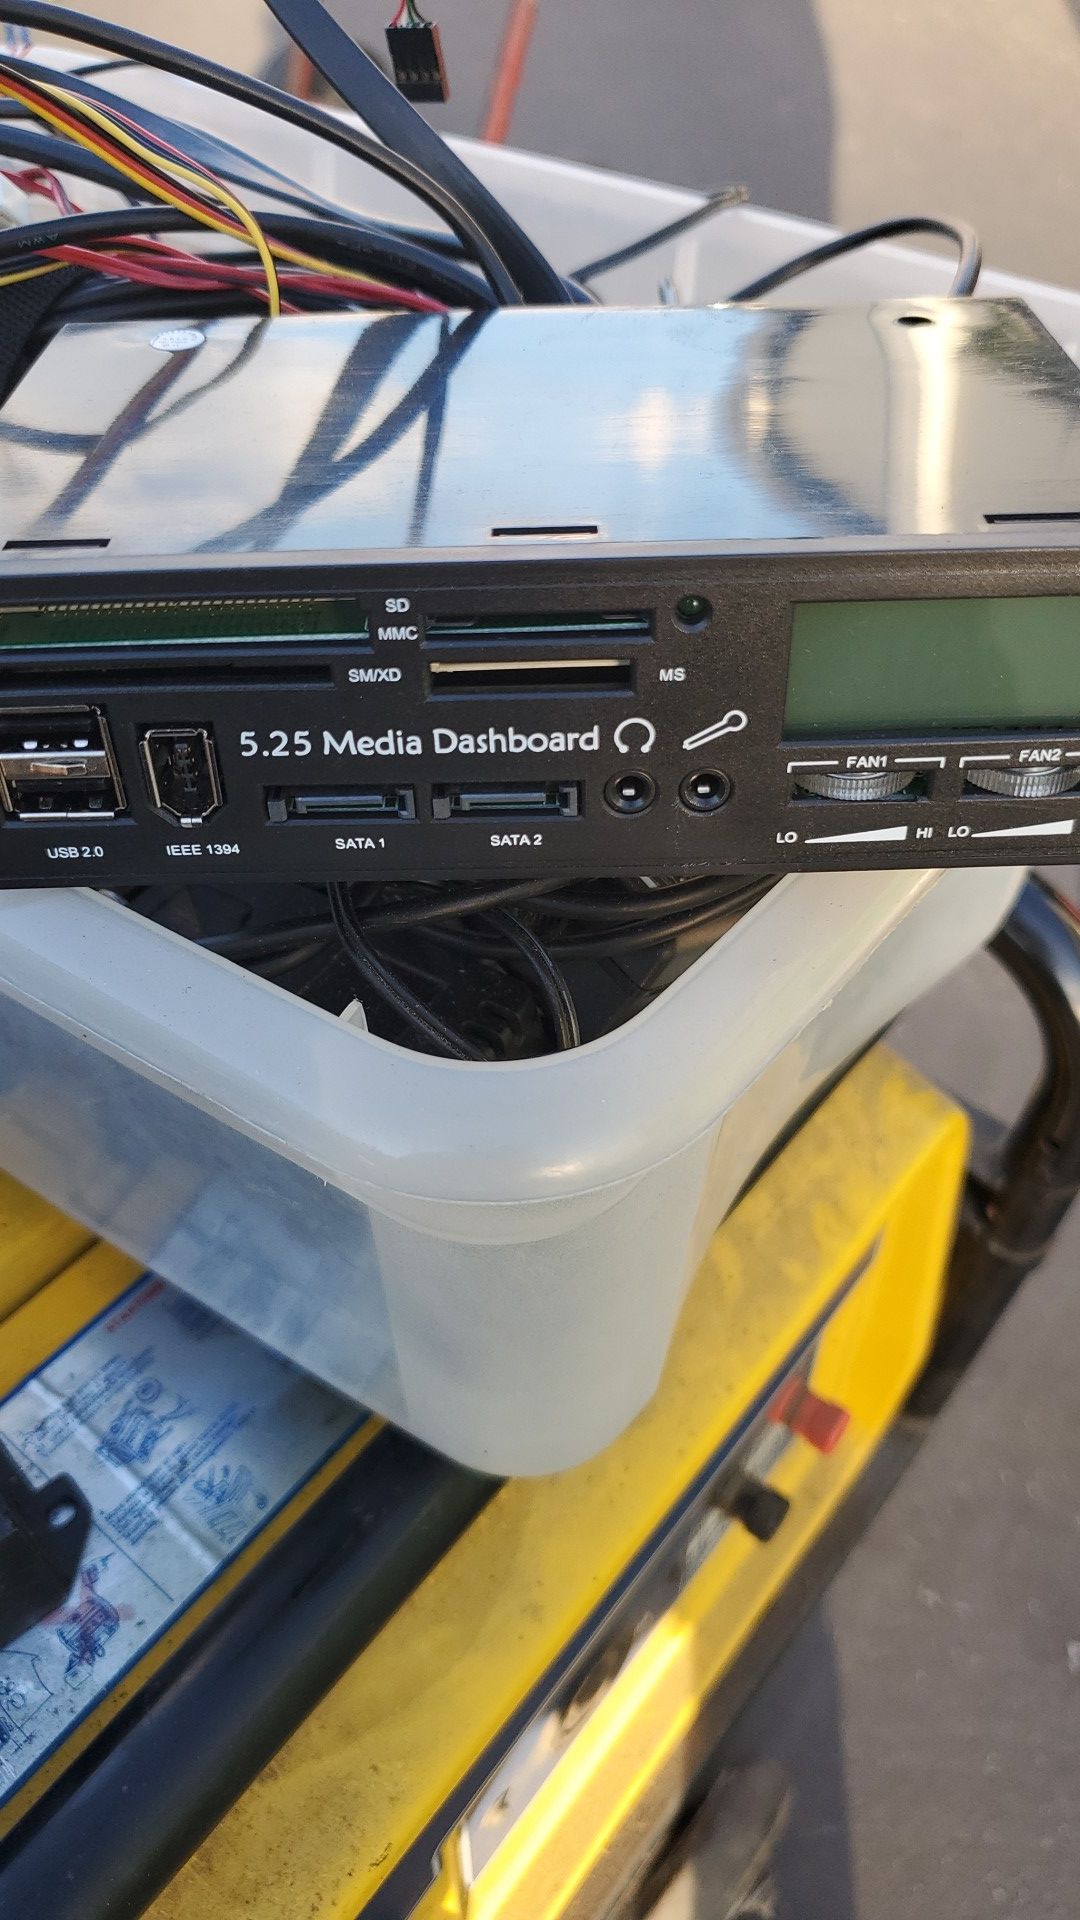 Computer parts it's a m .25 media dashboard and has fan speeds earphones hook up mic hook up